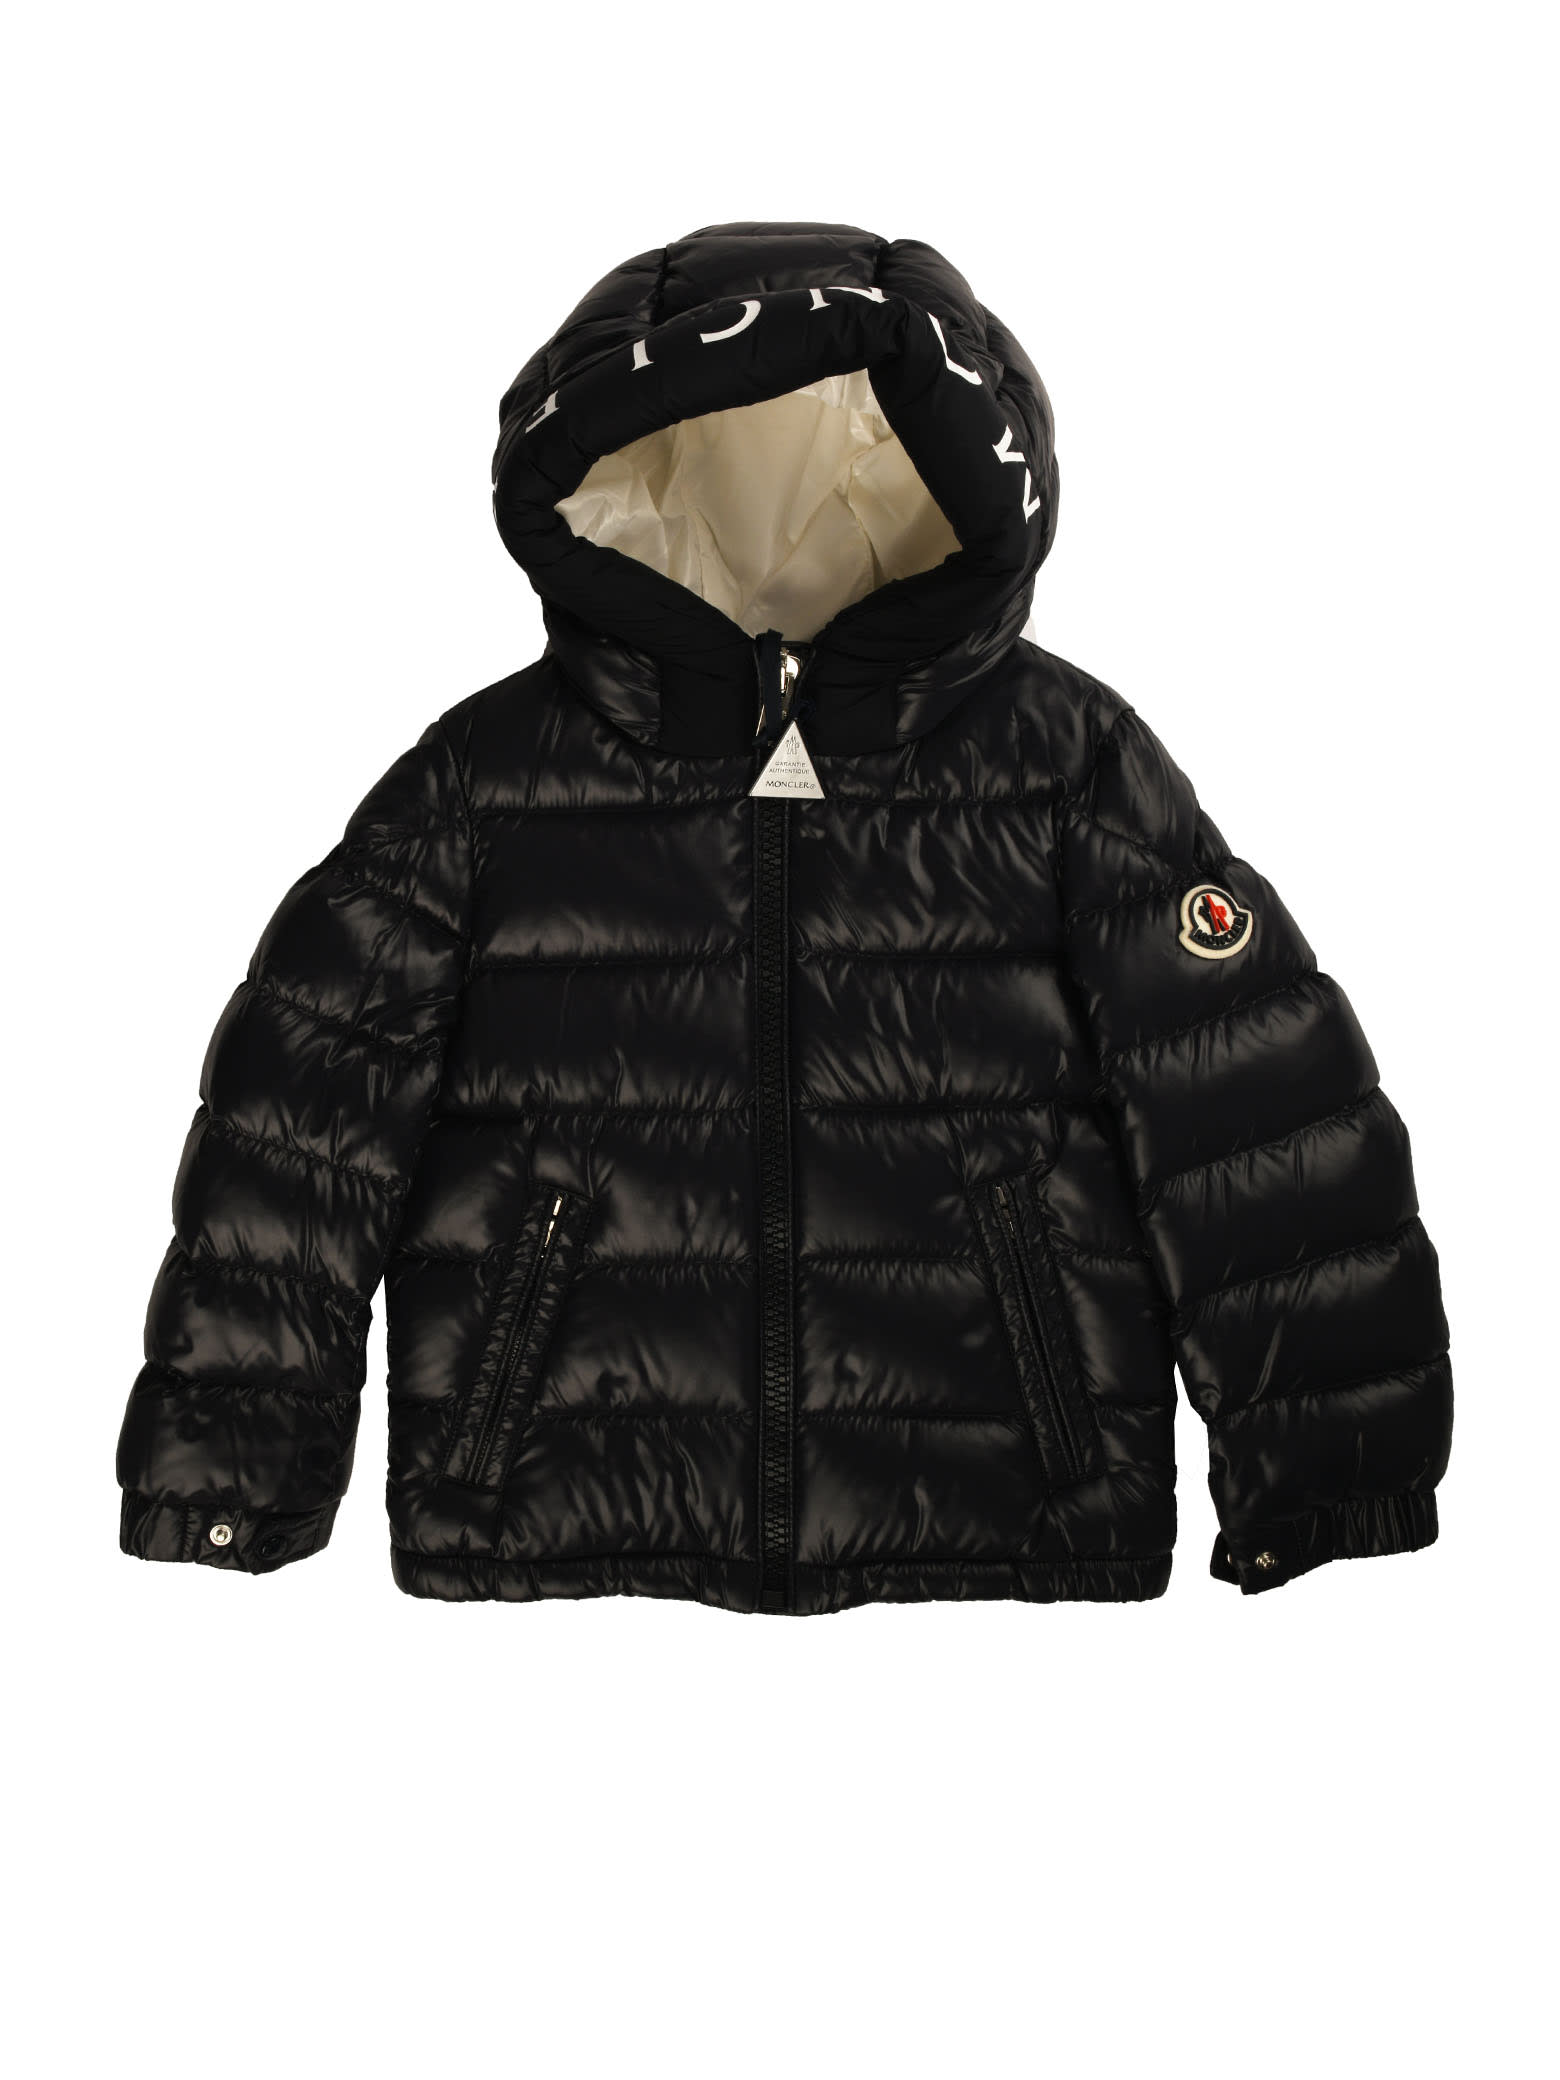 Moncler Blue Jacket With Hood And Writing